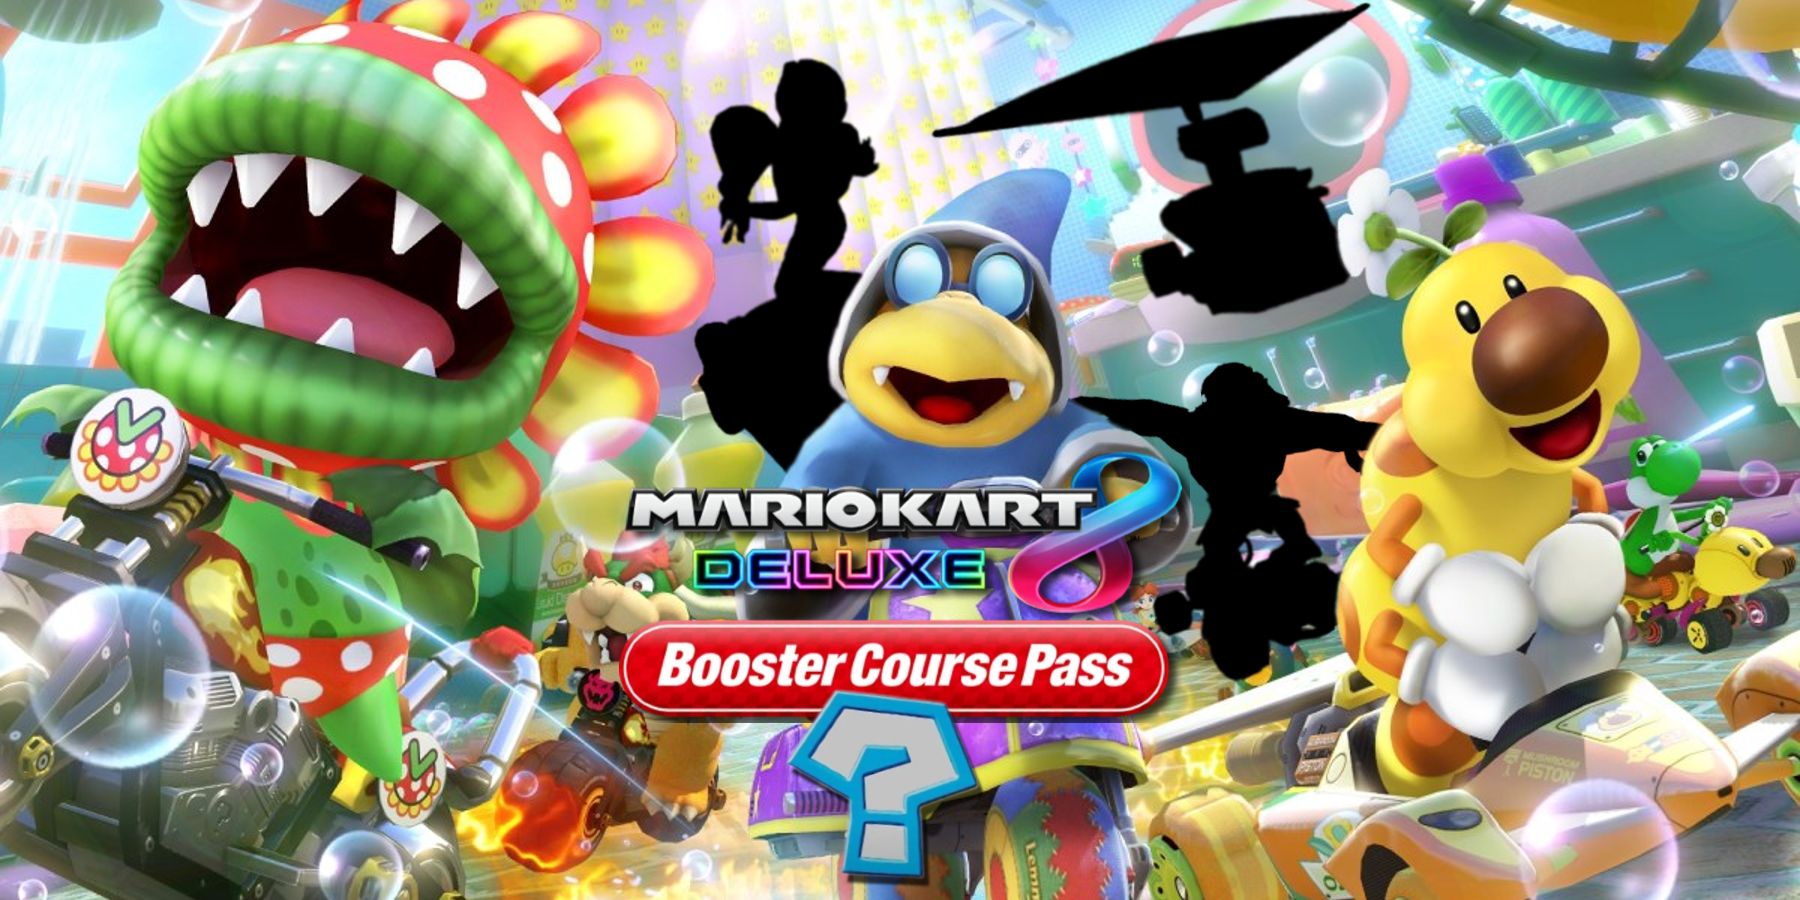 The Likeliest Candidates For Mario Kart 8's Wave 6 Racers